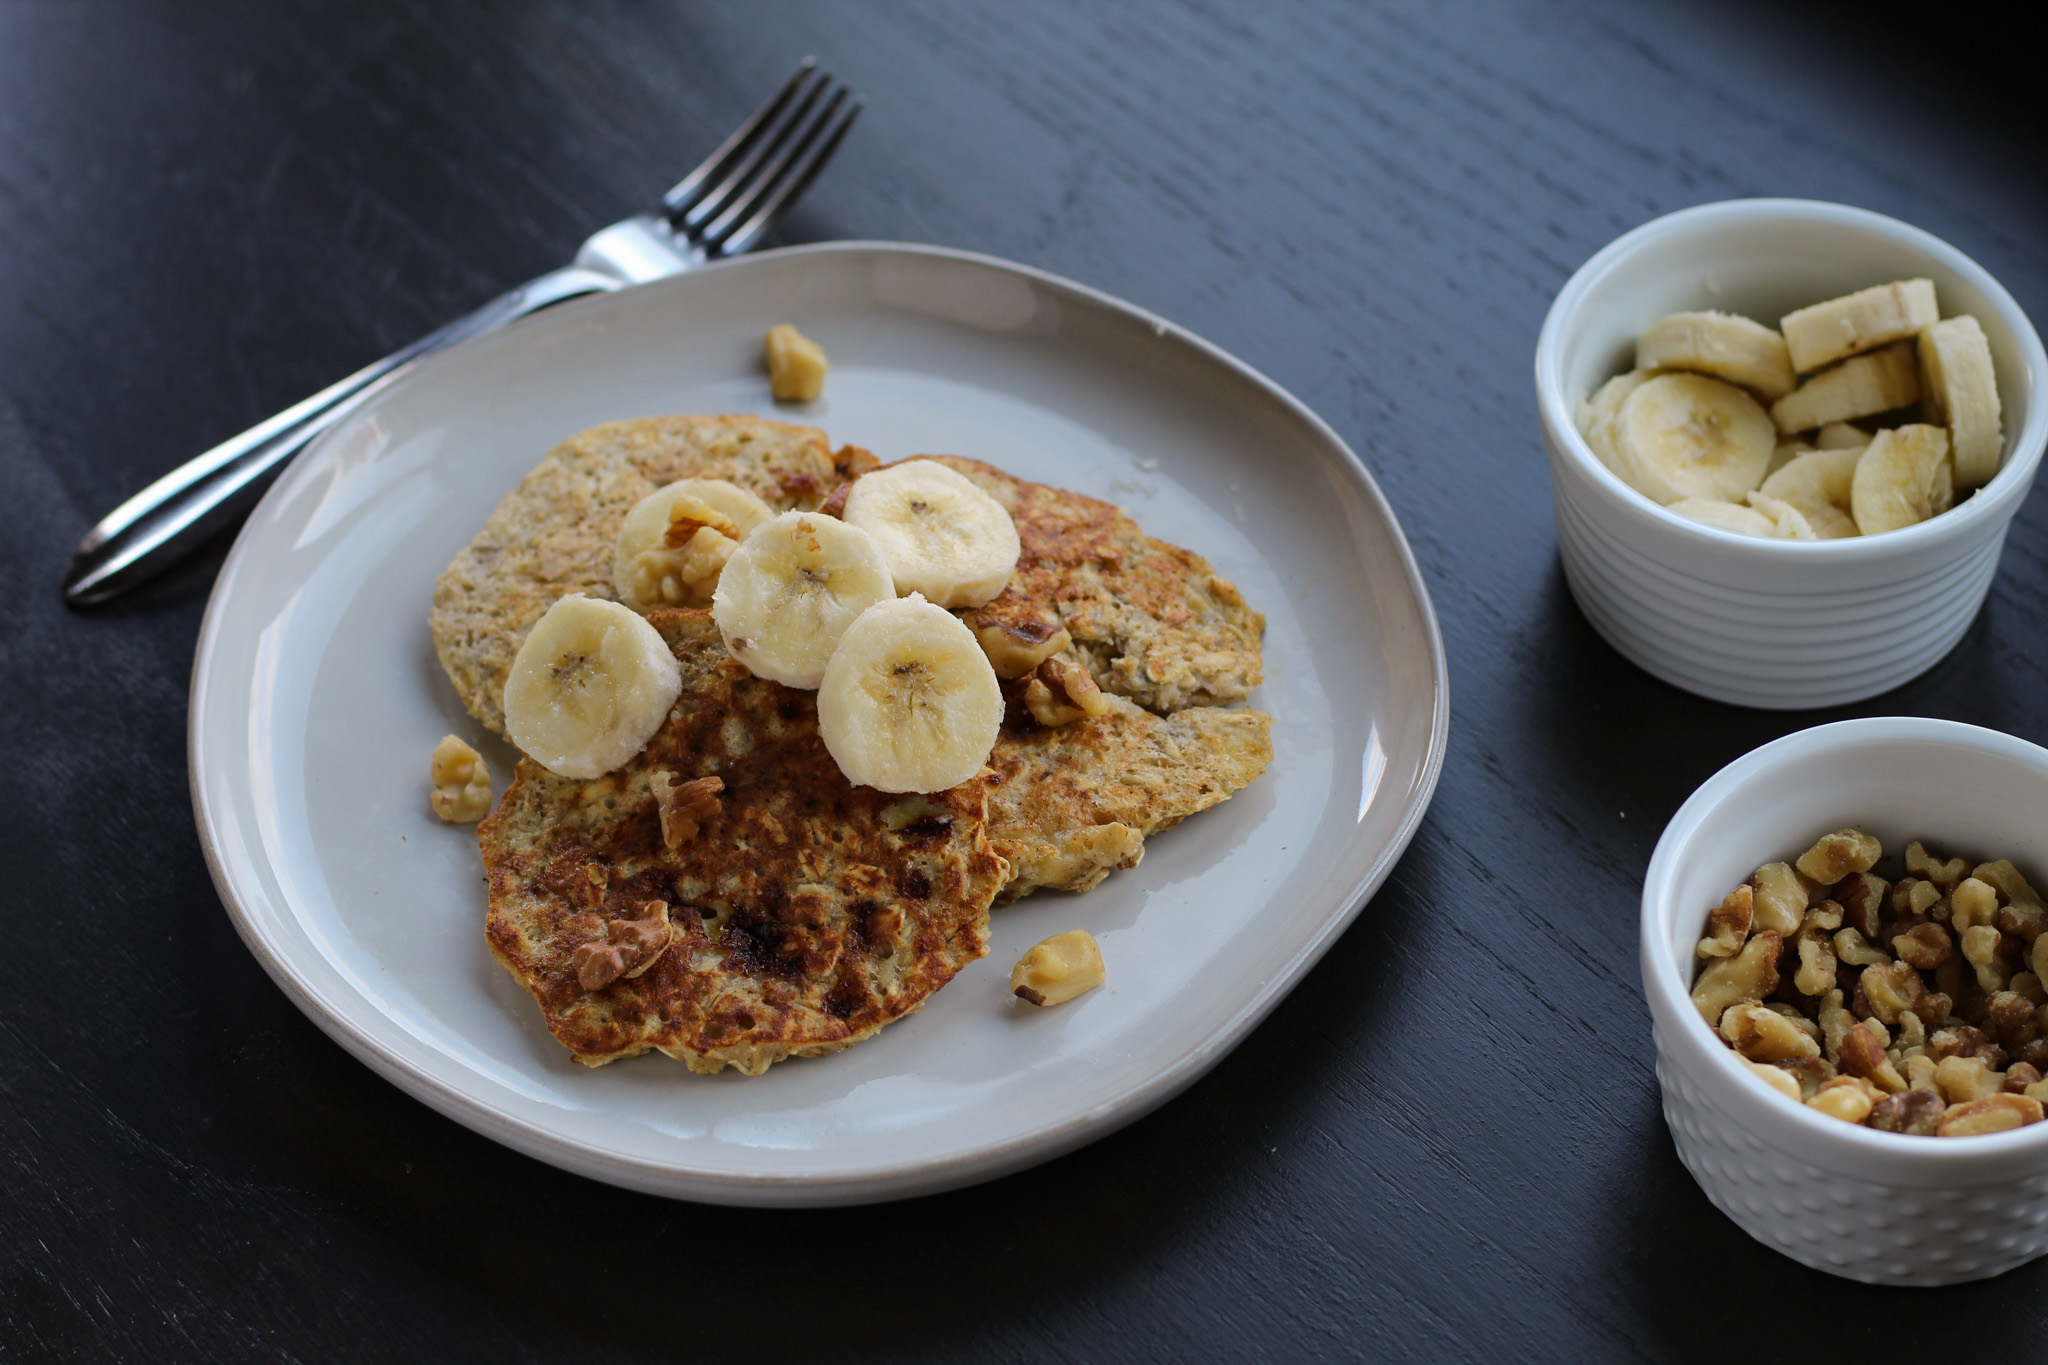 A plate of banana oatmeal pancakes topped with bananas and walnuts next to a fork and bowls of bananas and walnuts.